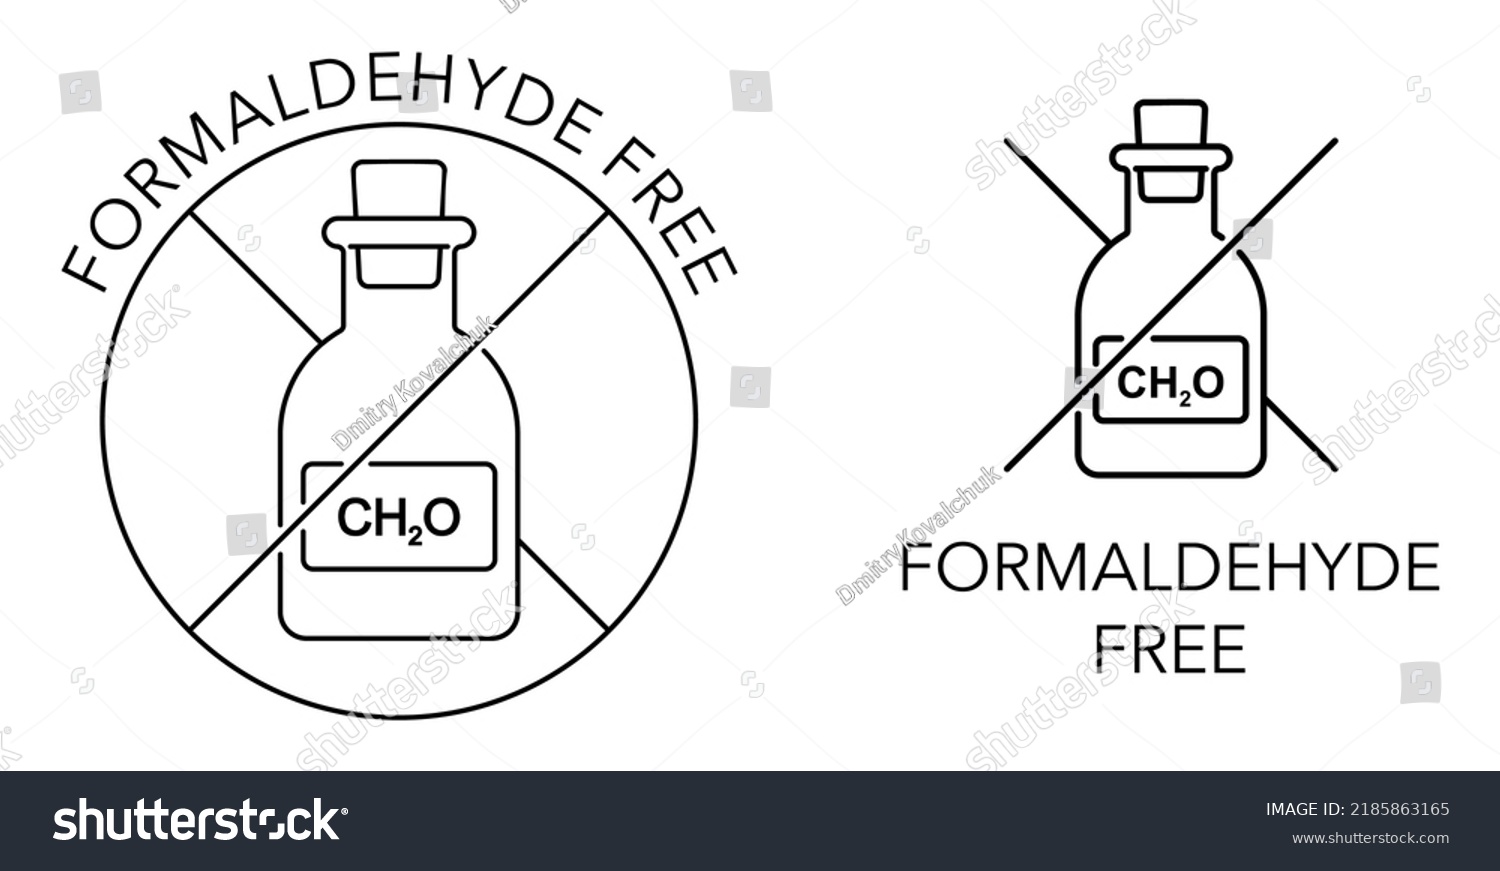 SVG of Formaldehyde free pictogram - no CH2O compound - pungent-smelling colourless gas svg